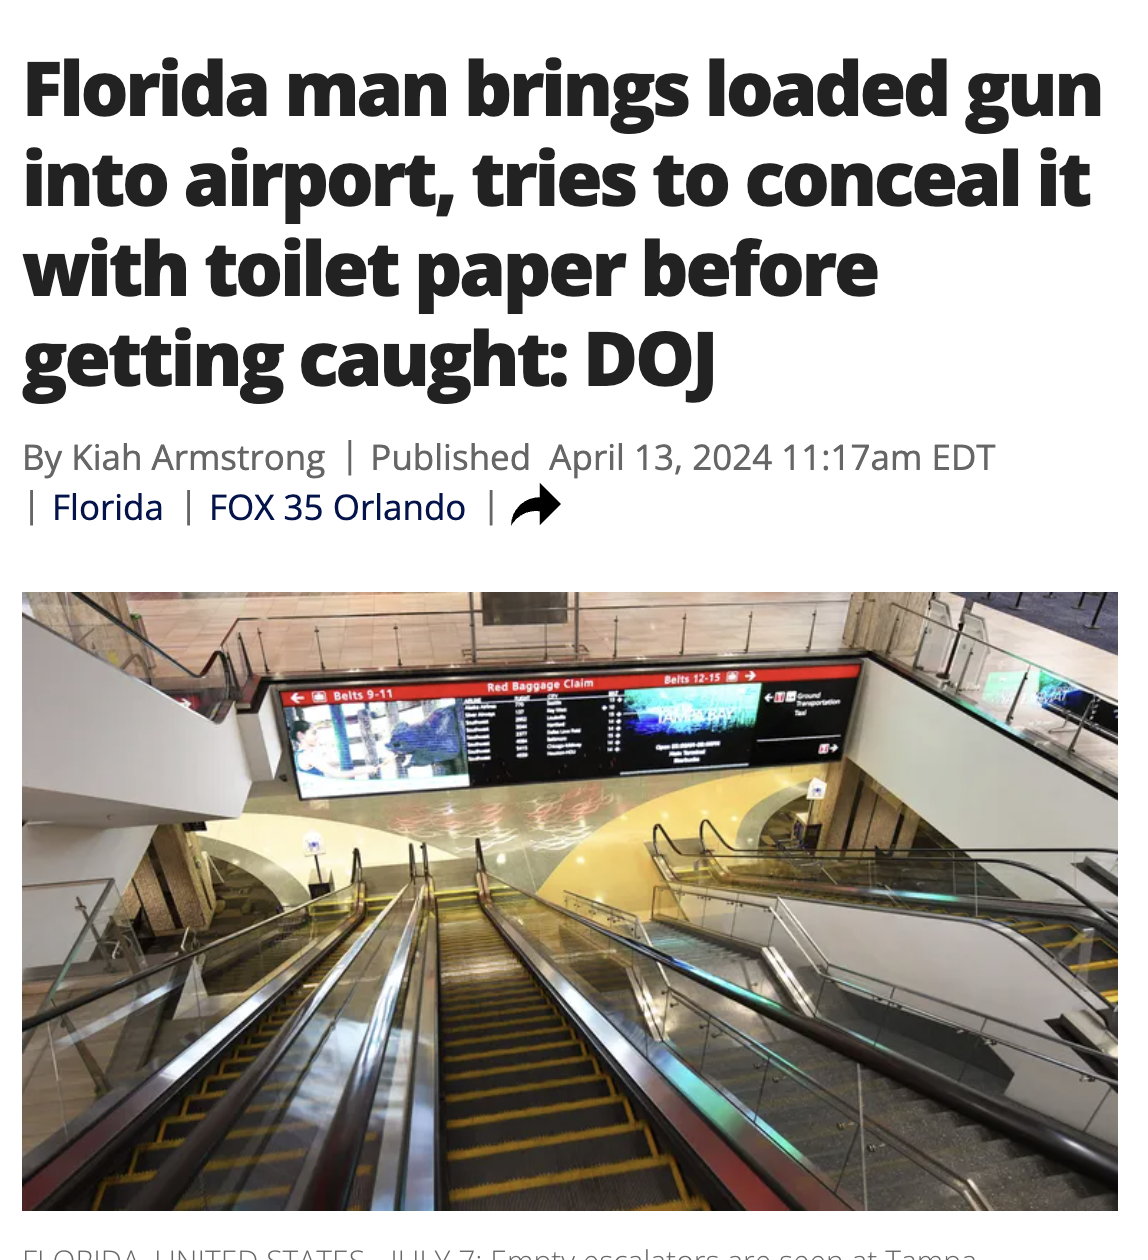 ten-pin bowling - Florida man brings loaded gun into airport, tries to conceal it with toilet paper before getting caught Doj By Kiah Armstrong | Published am Edt Florida | Fox 35 Orlando | Florida Linited STATESURVEmin